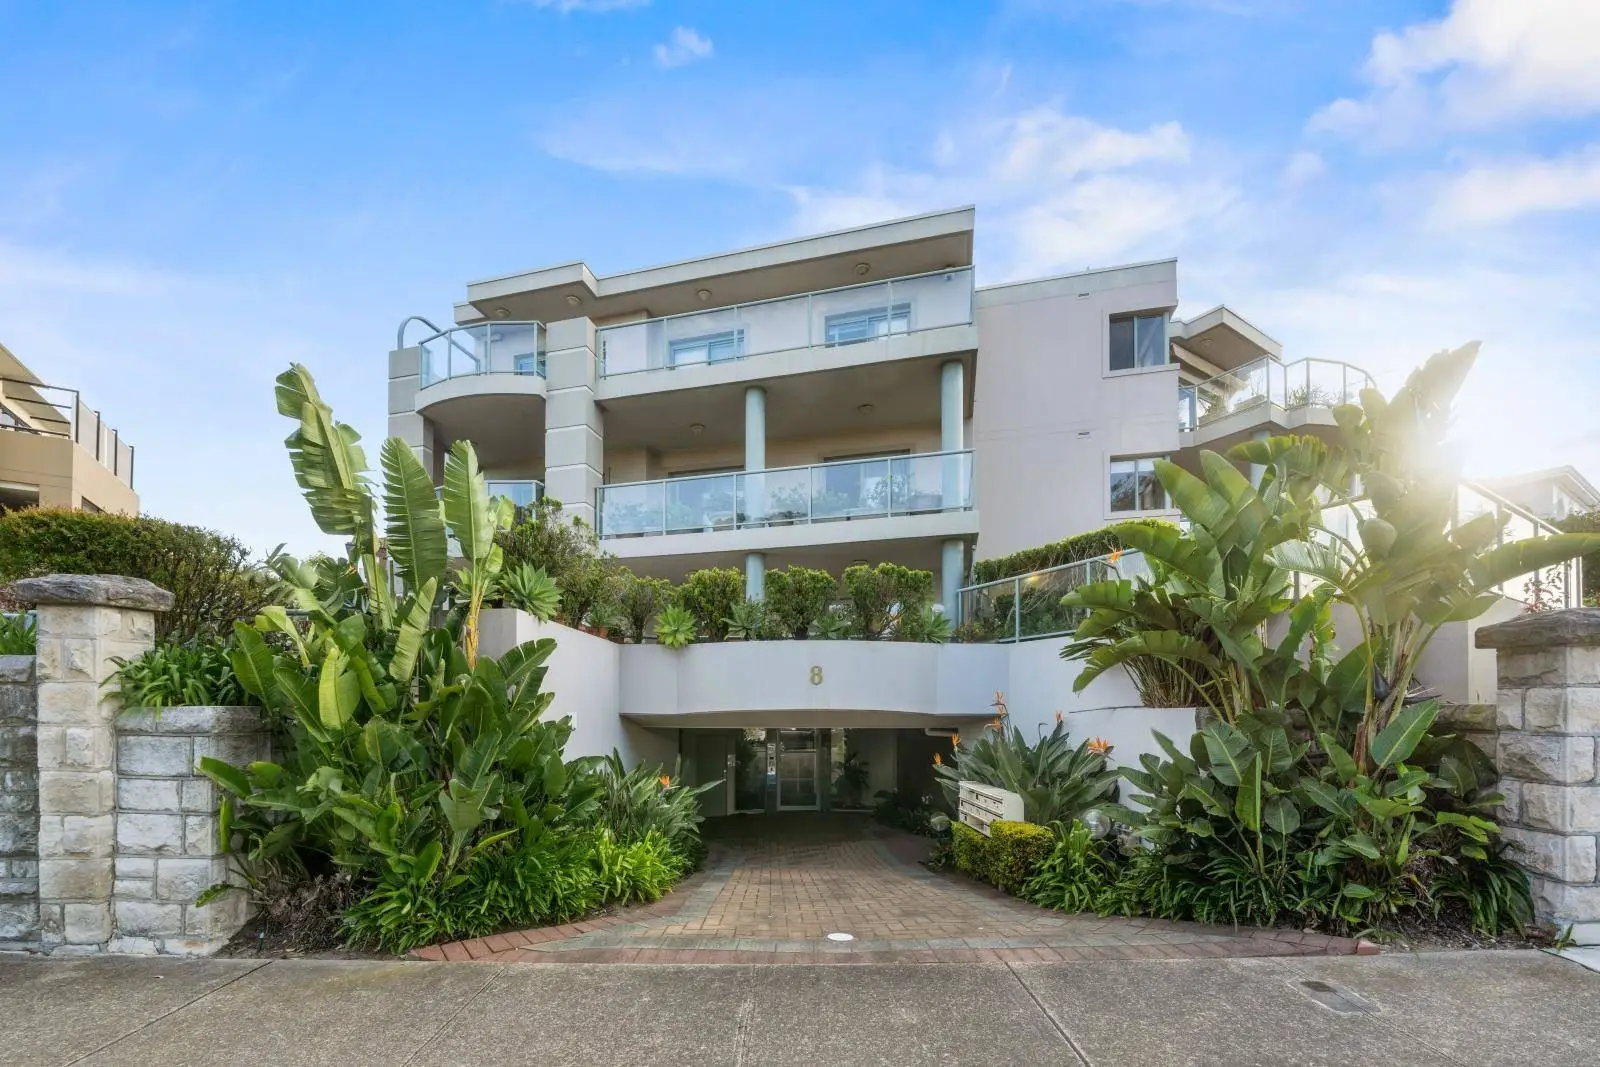 2/8 Benelong Crescent, Bellevue Hill Leased by Sydney Sotheby's International Realty - image 1